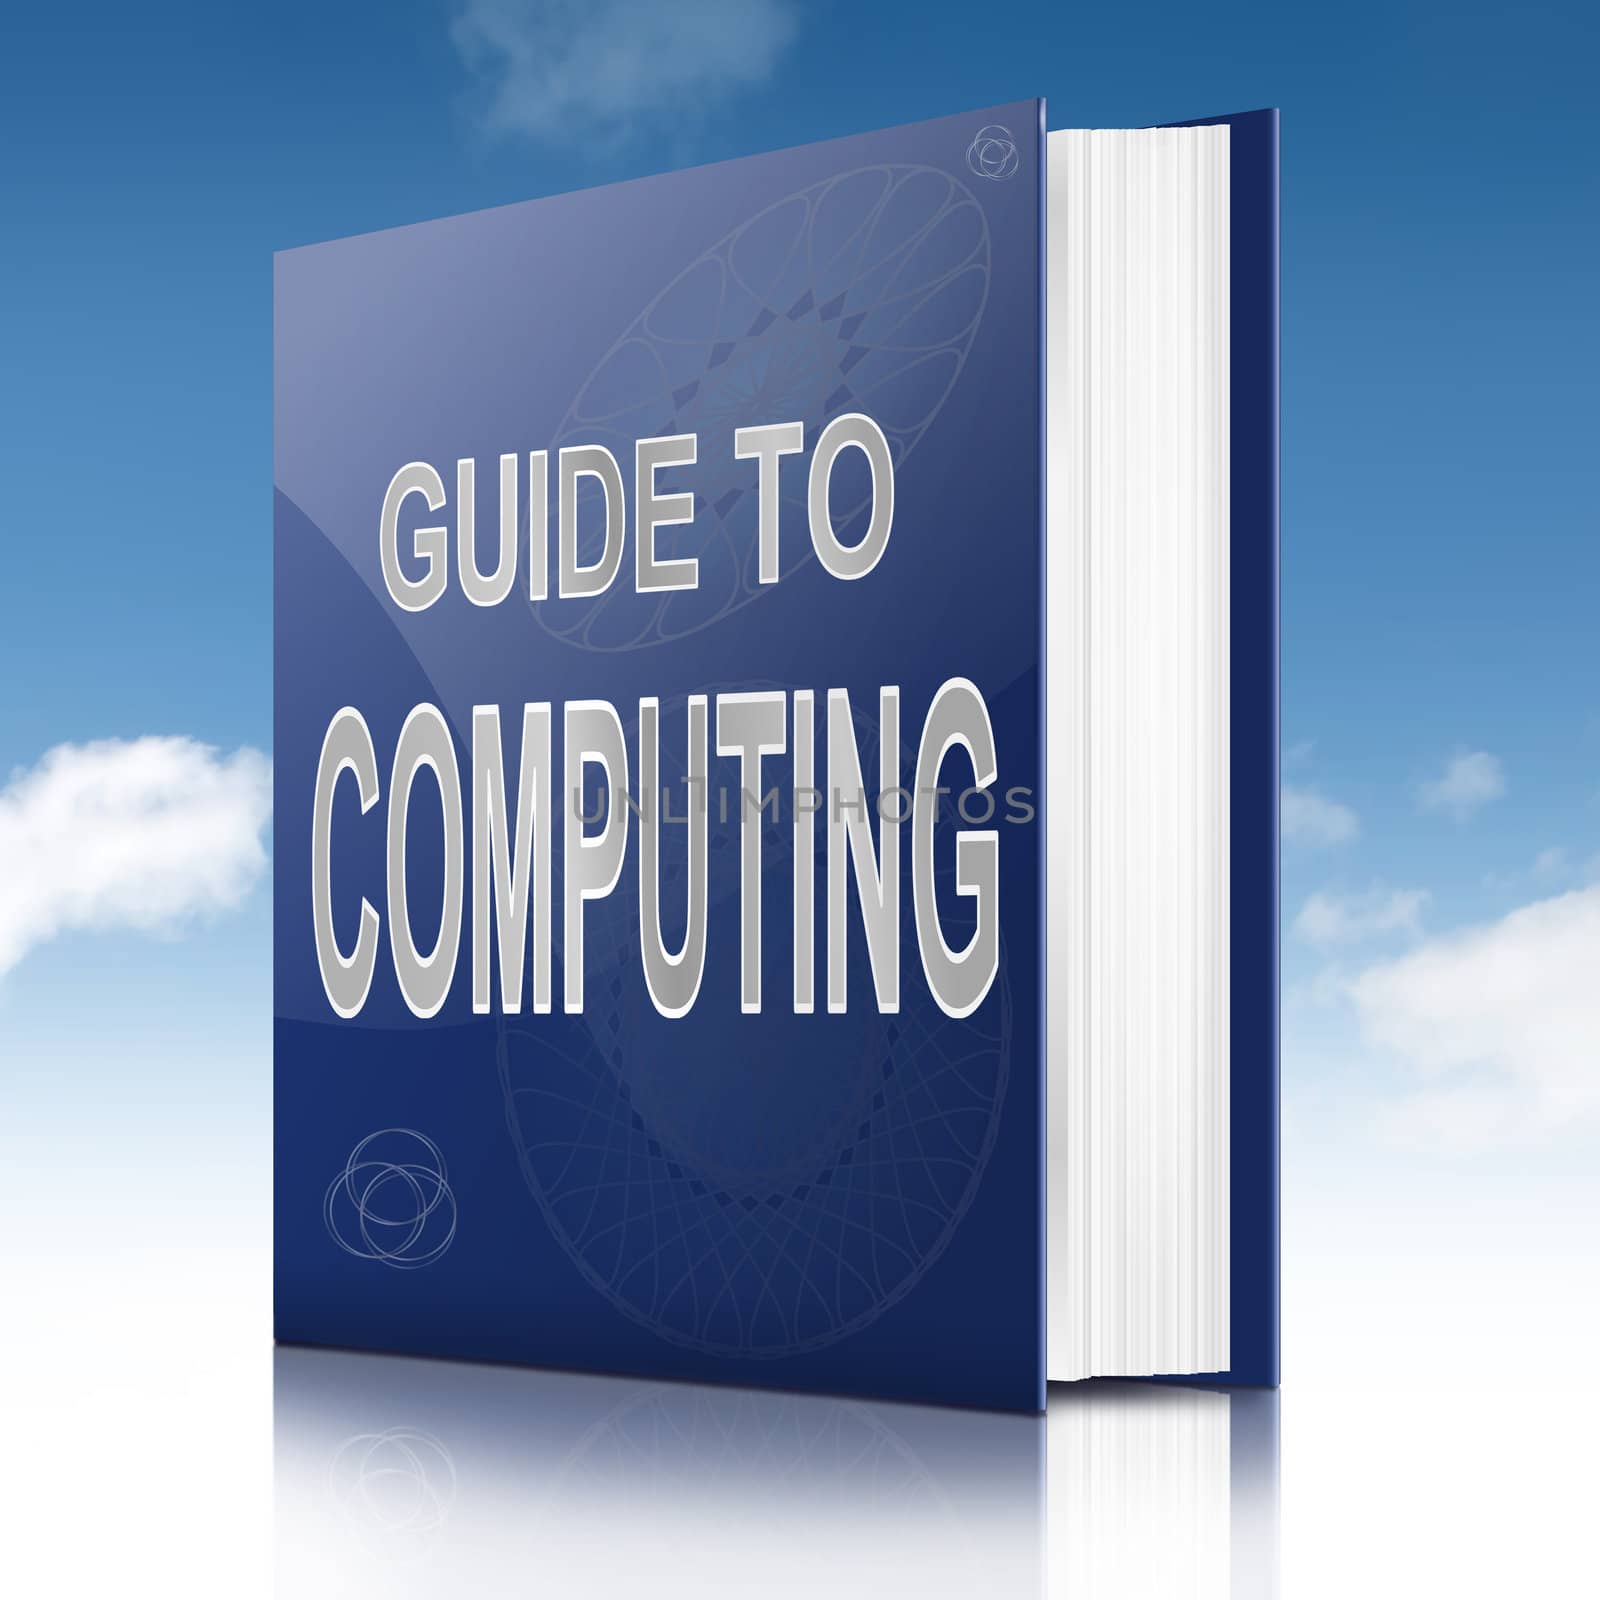 Illustration depicting a book with a computing concept title. Sky background.